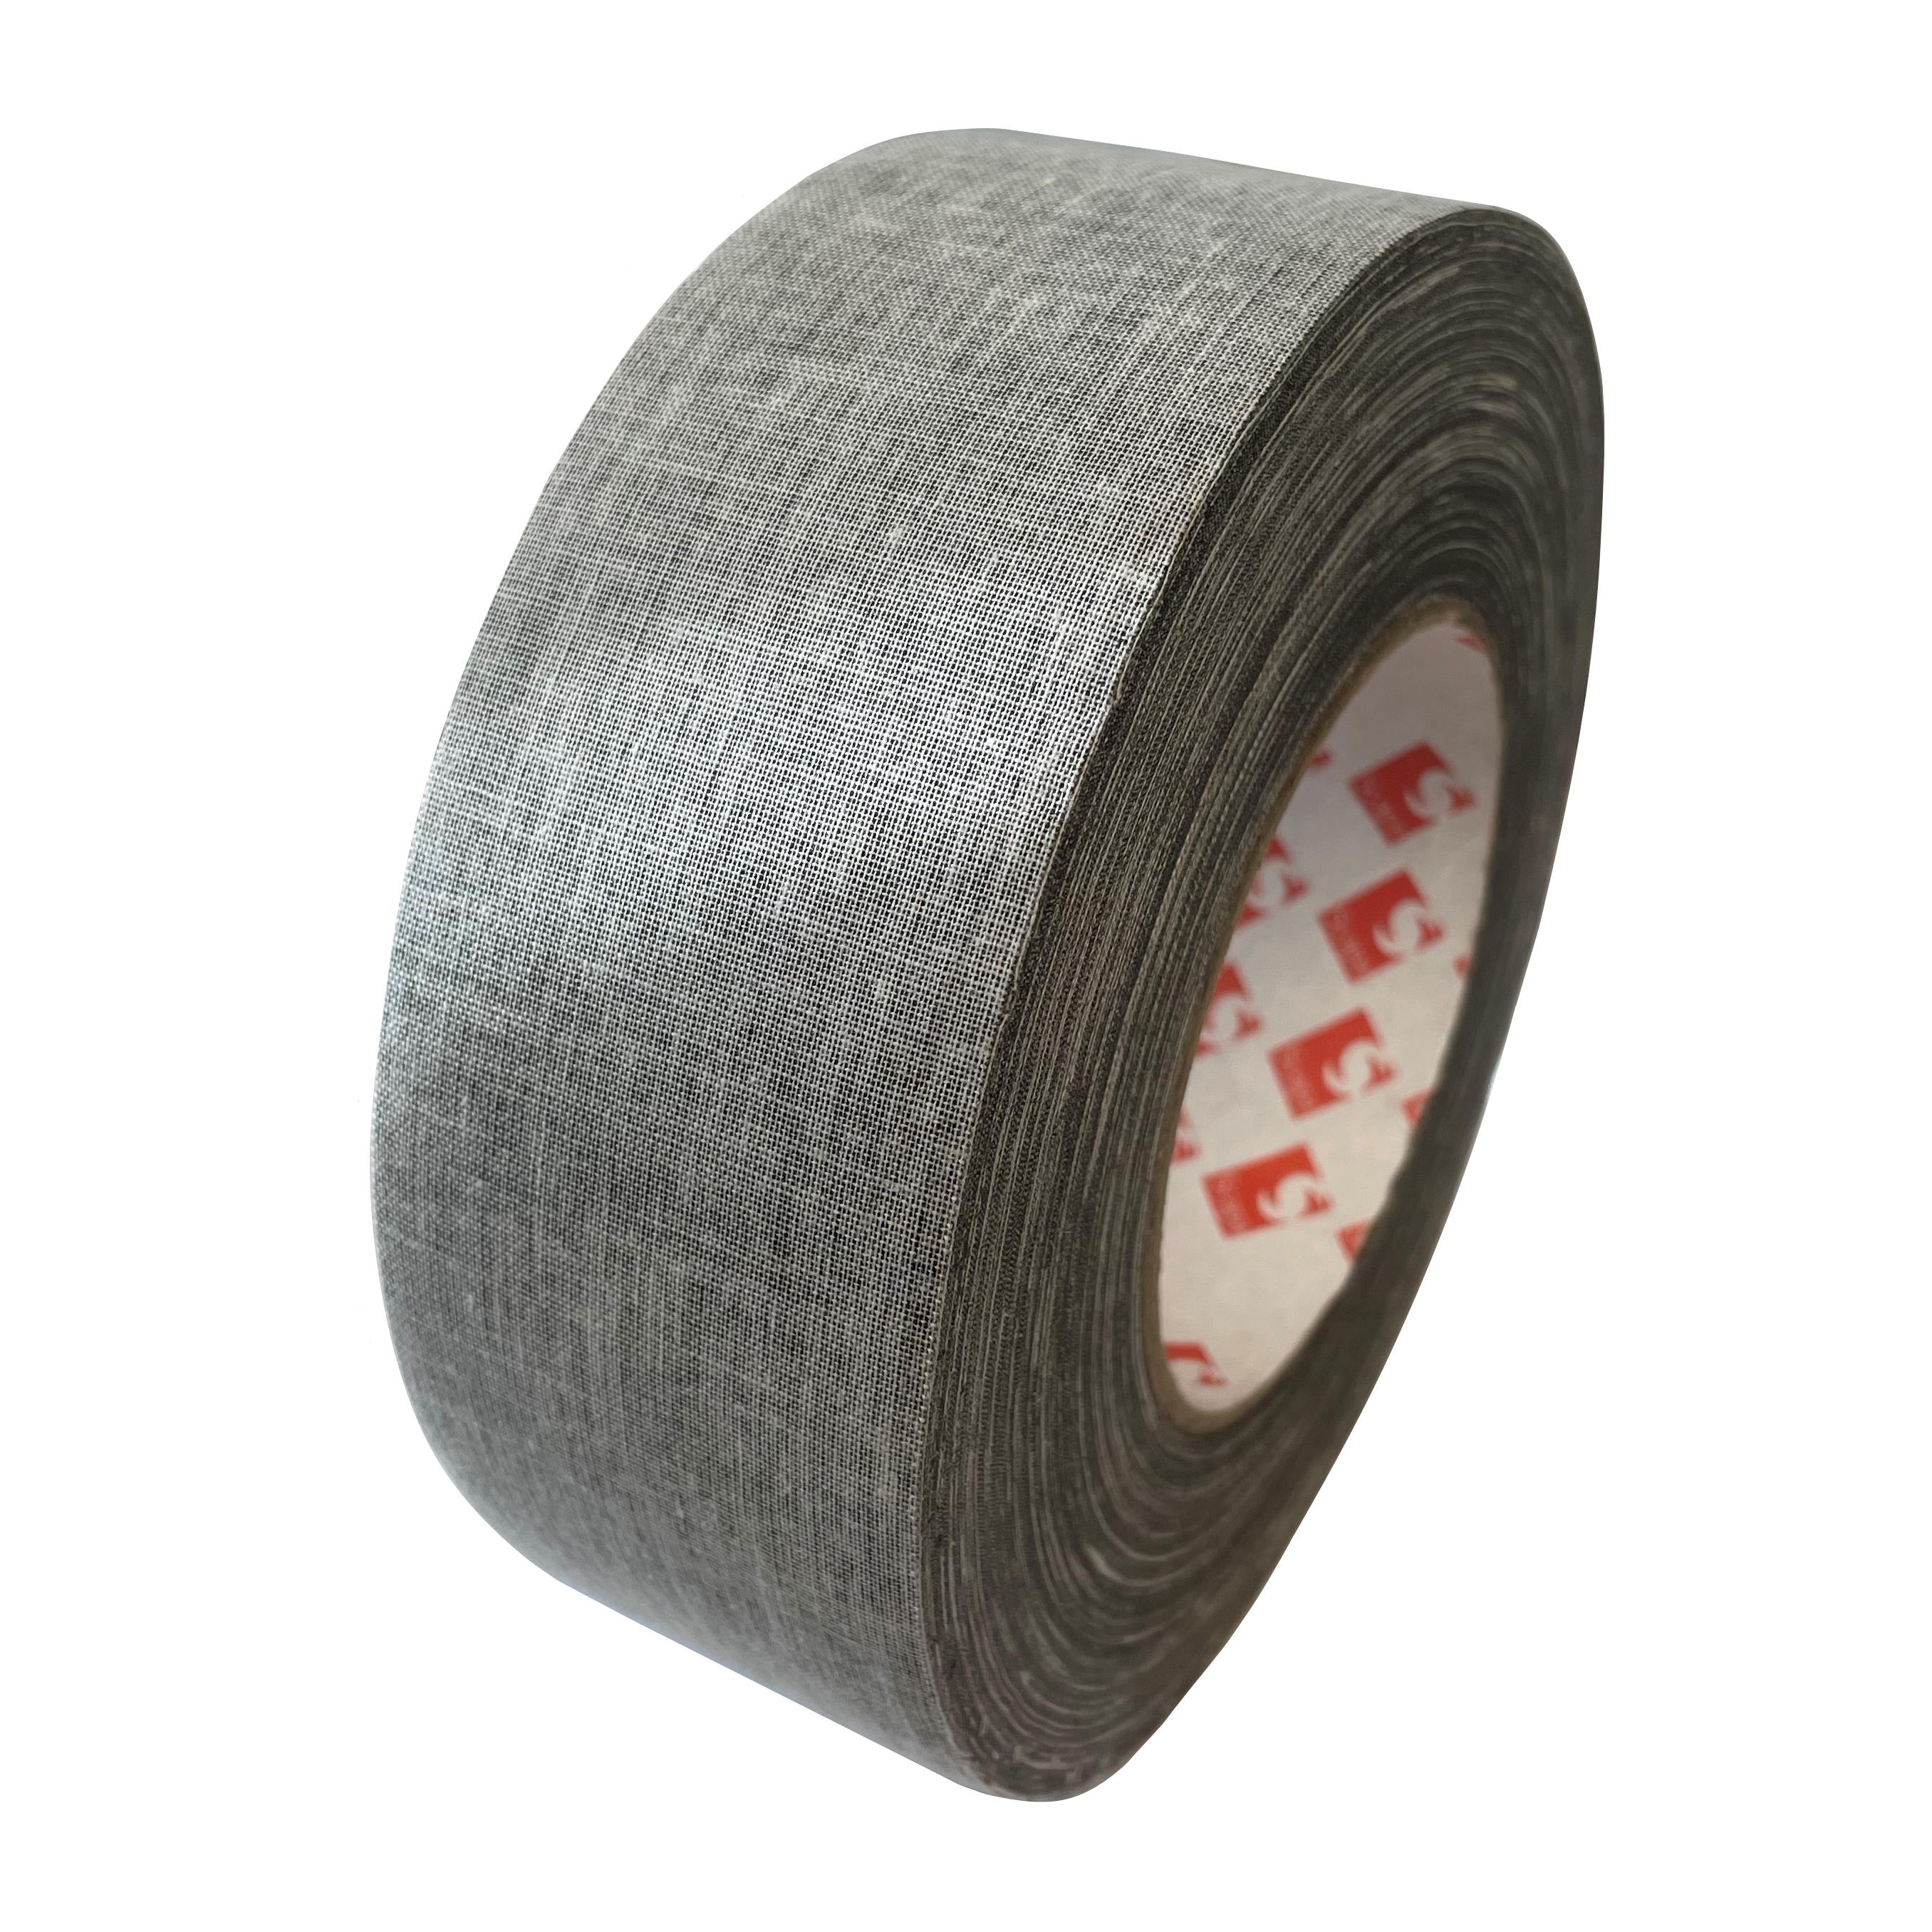 Scapa CoverGard 3364 Cotton protective fabric masking tape, 25mmx50m, grey